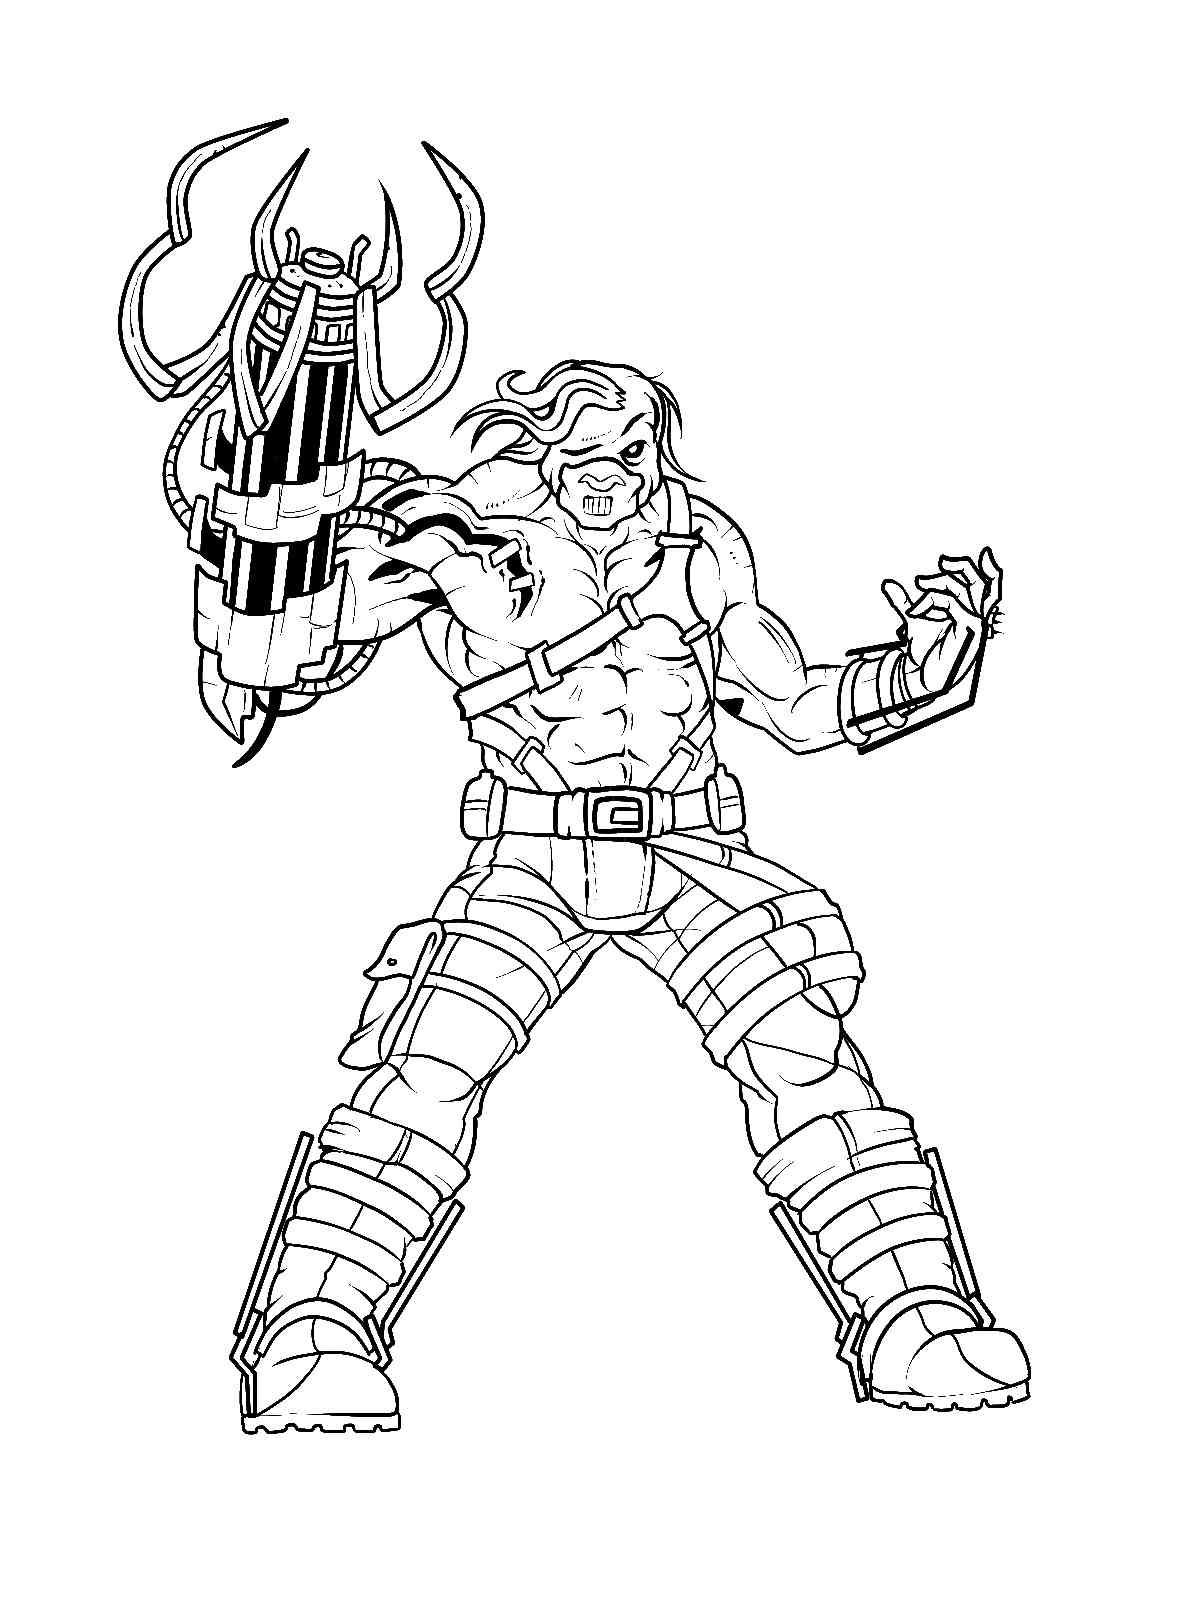 Ustanak from Resident Evil coloring page